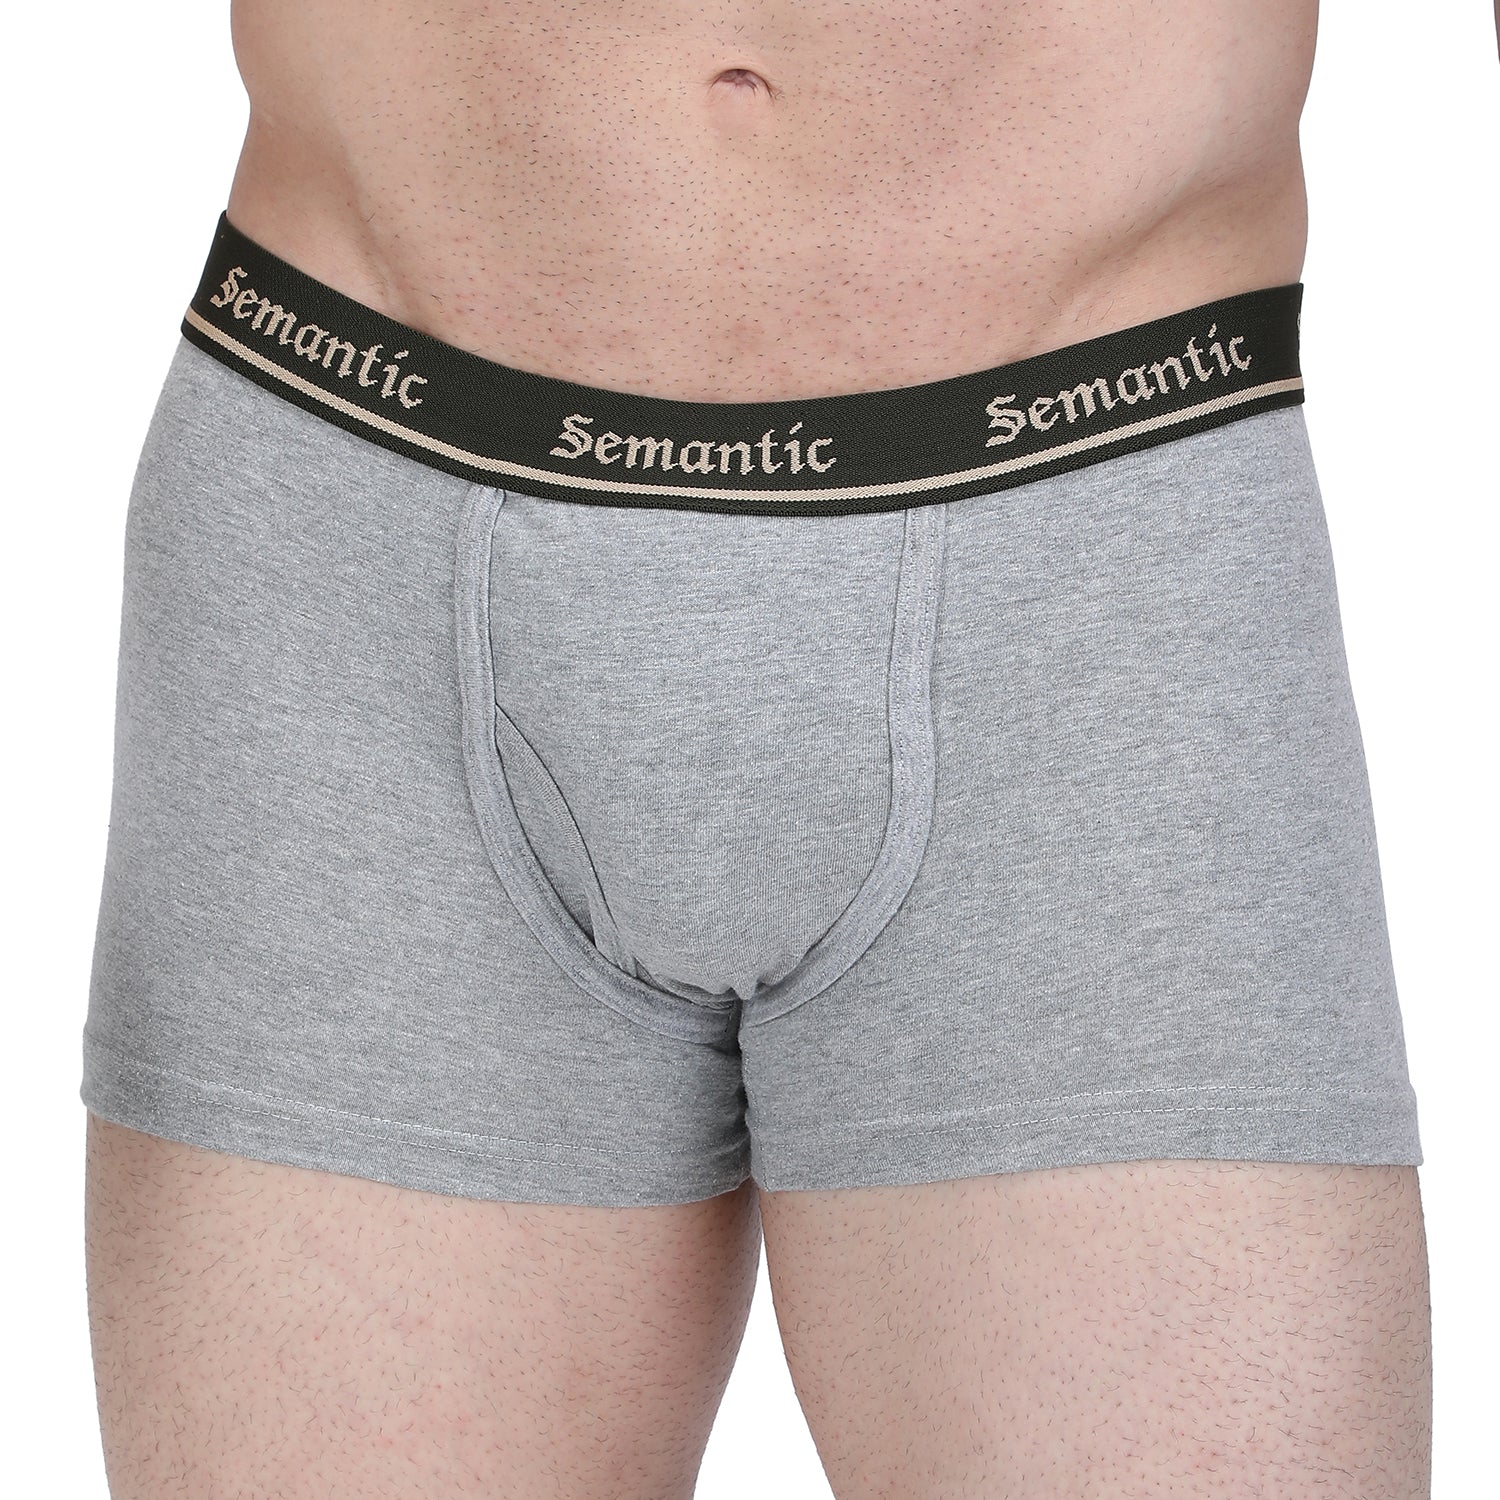 Semantic Cotton Trunks with Fly - Solid